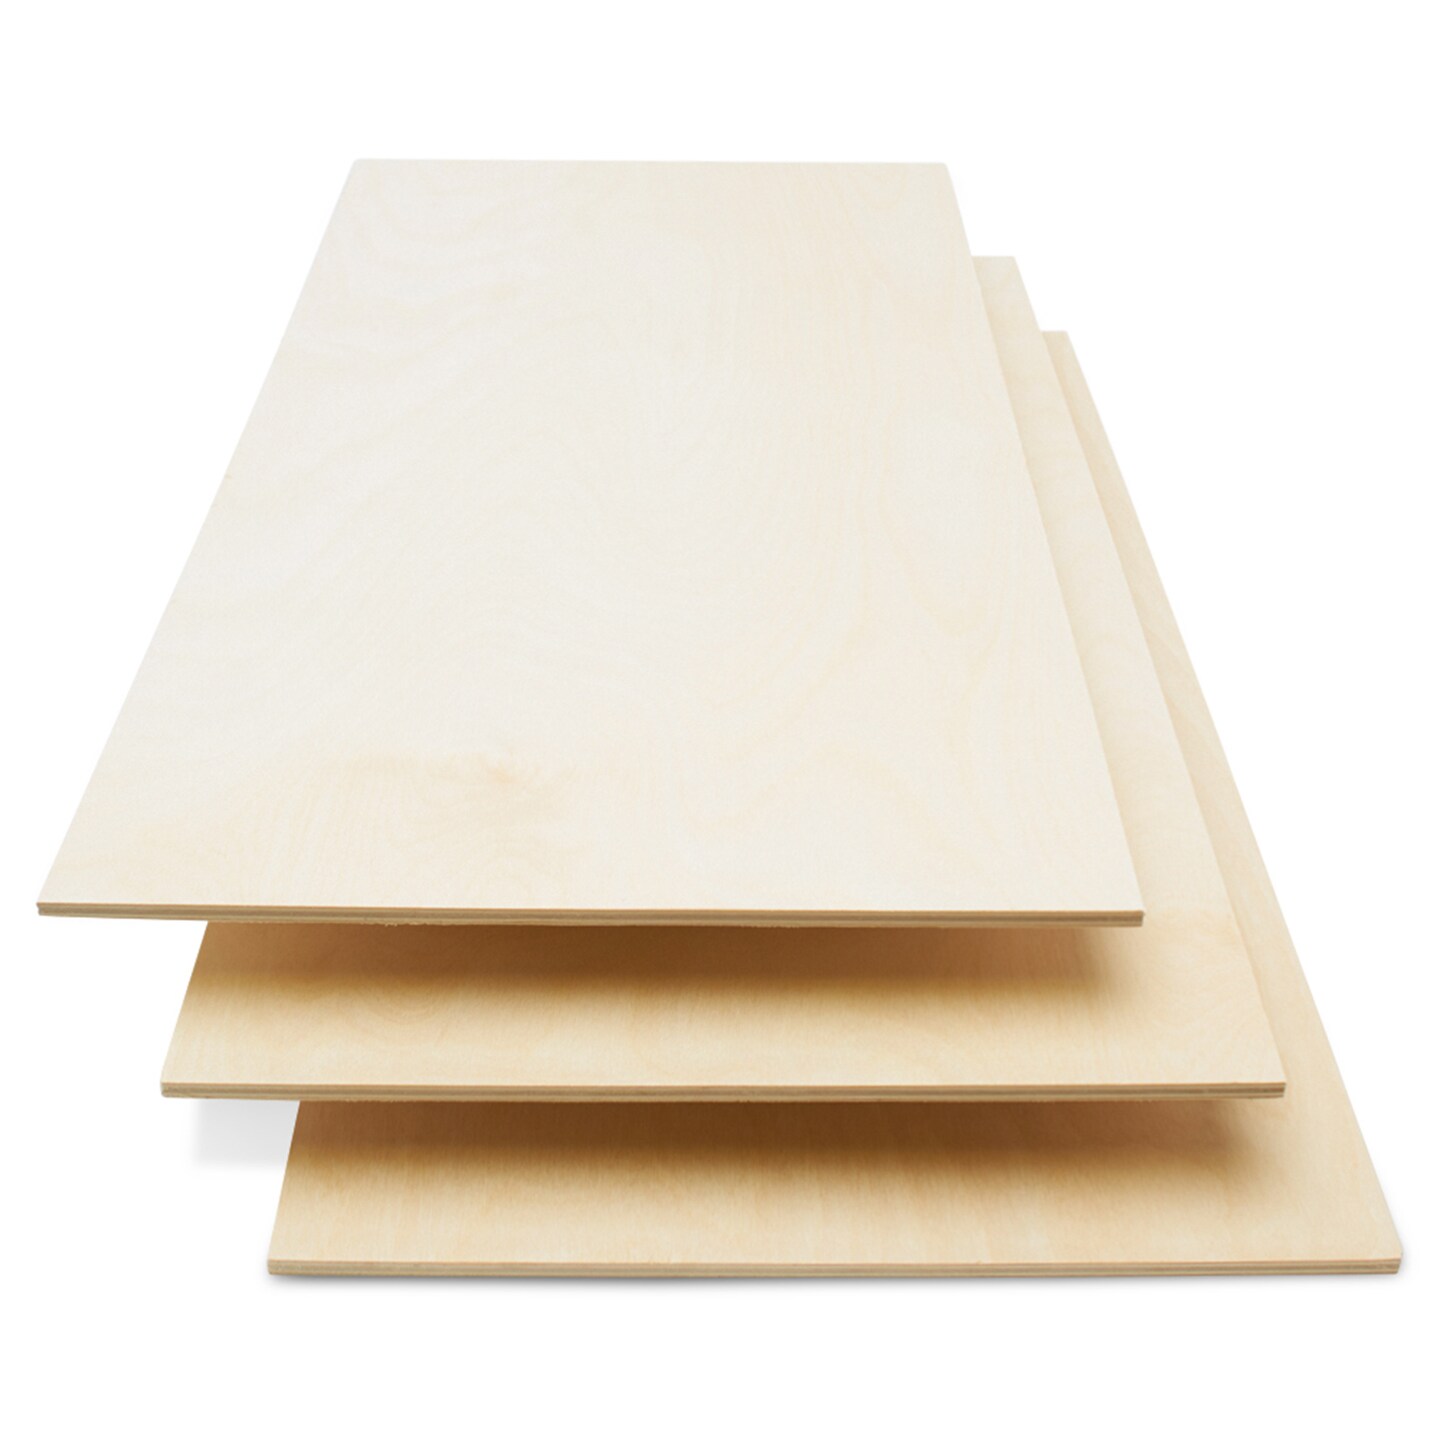 Baltic Birch Plywood, 12 x 24 Inch, B/BB Grade Sheets, 1/4 or 1/8 Inch Thick| Woodpeckers